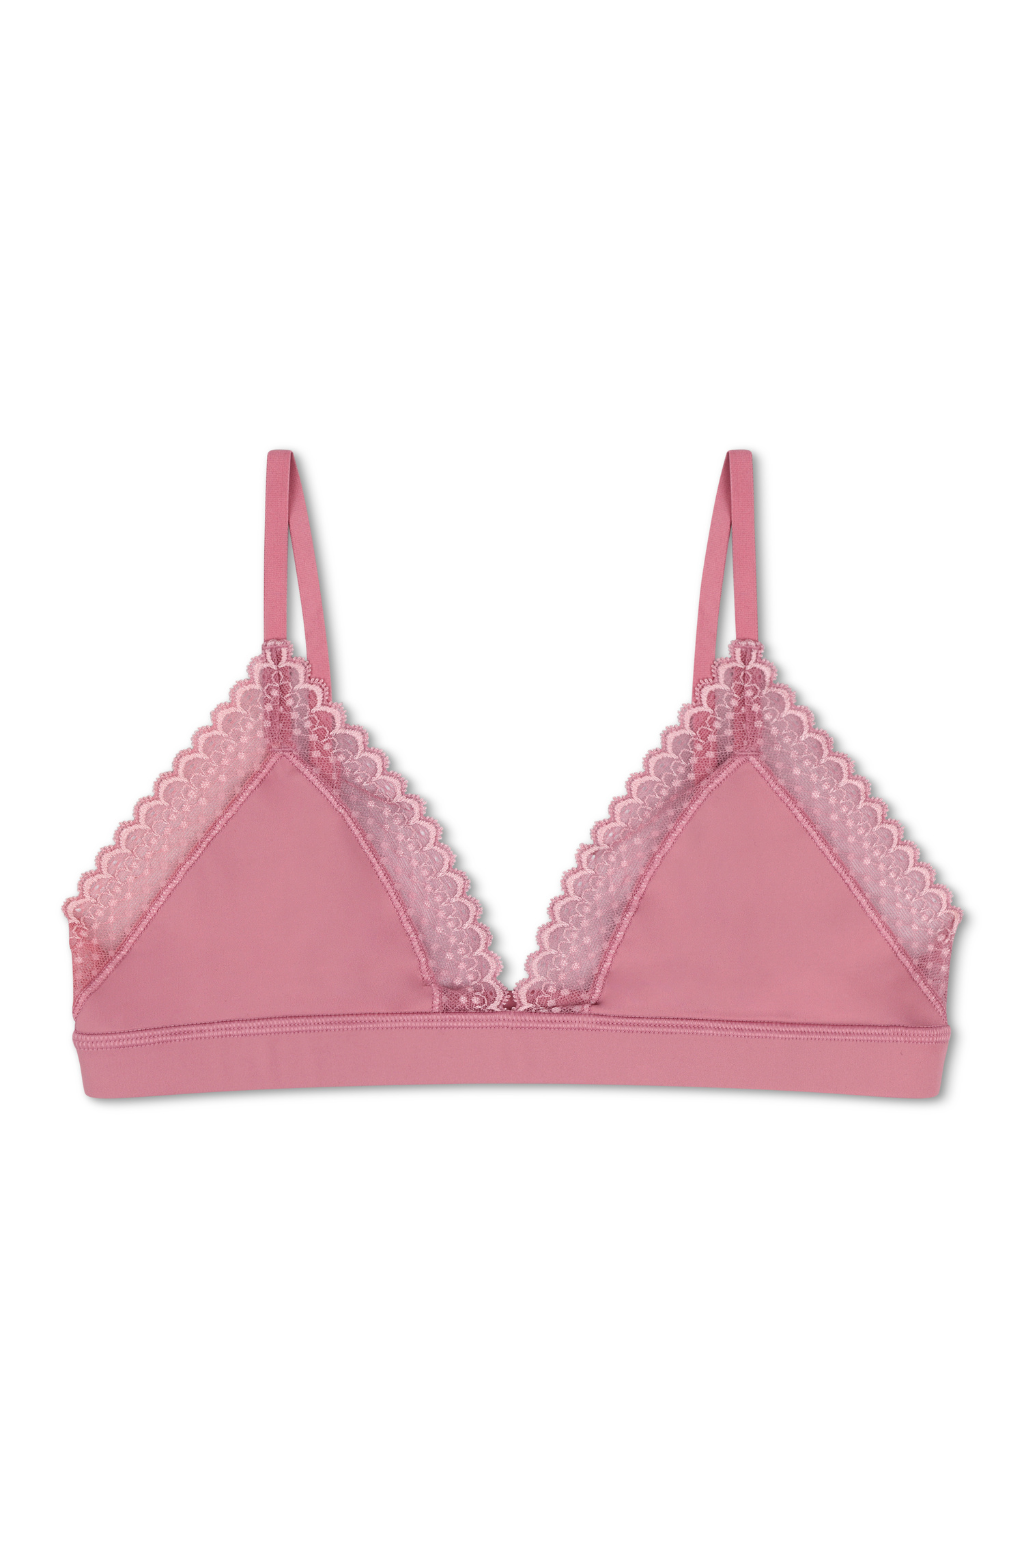 Urbody Lace Bralette in Rosewater